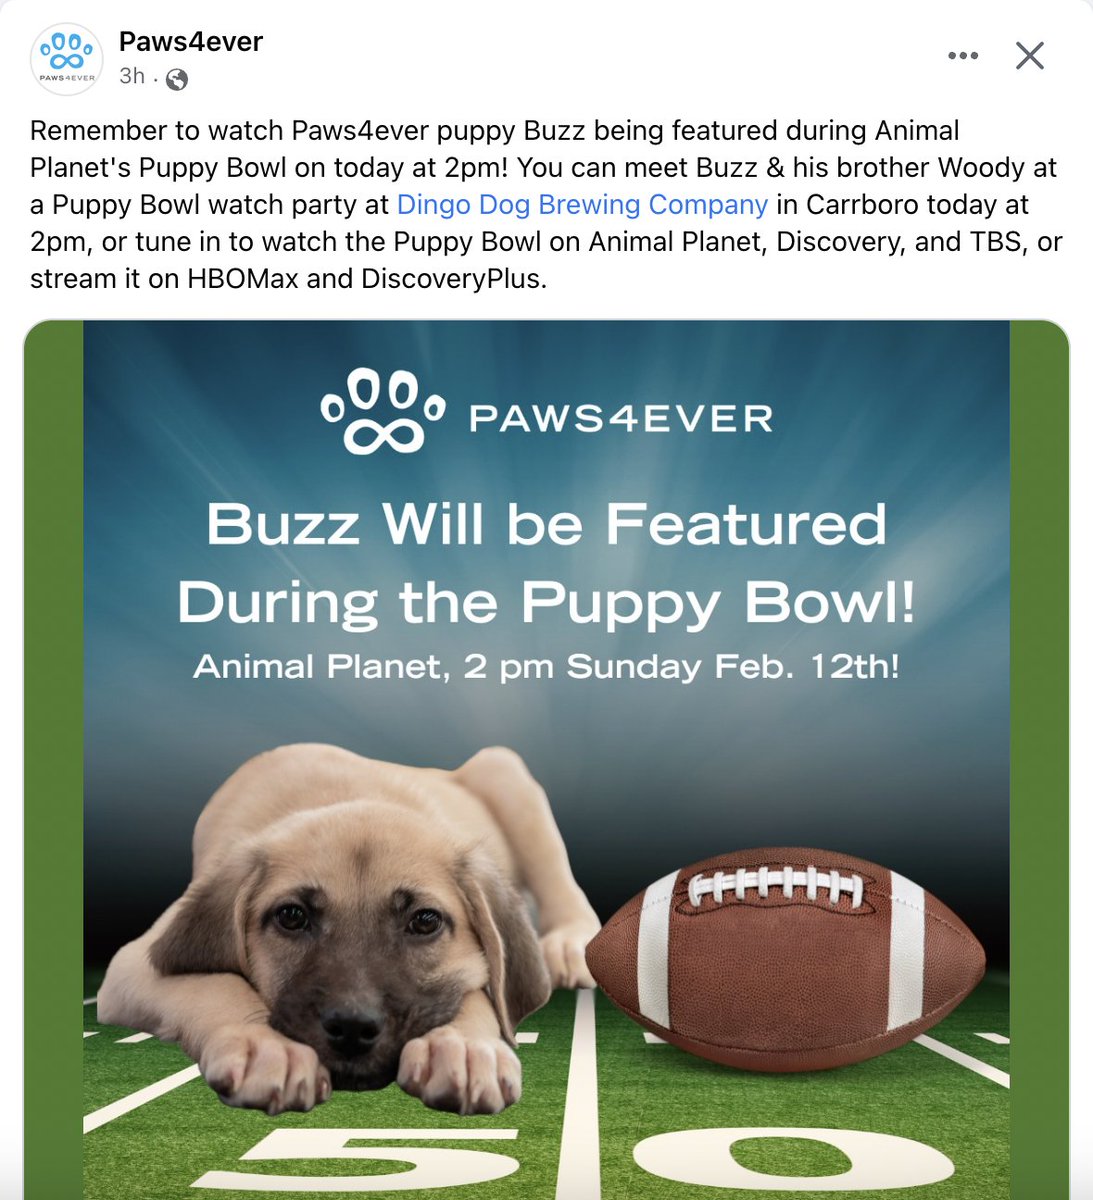 Congratulations to Buzz! I used to volunteer at Paws4ever when I lived in North Carolina, so it is exciting to see a doggo from that shelter get in the Puppy Bowl.